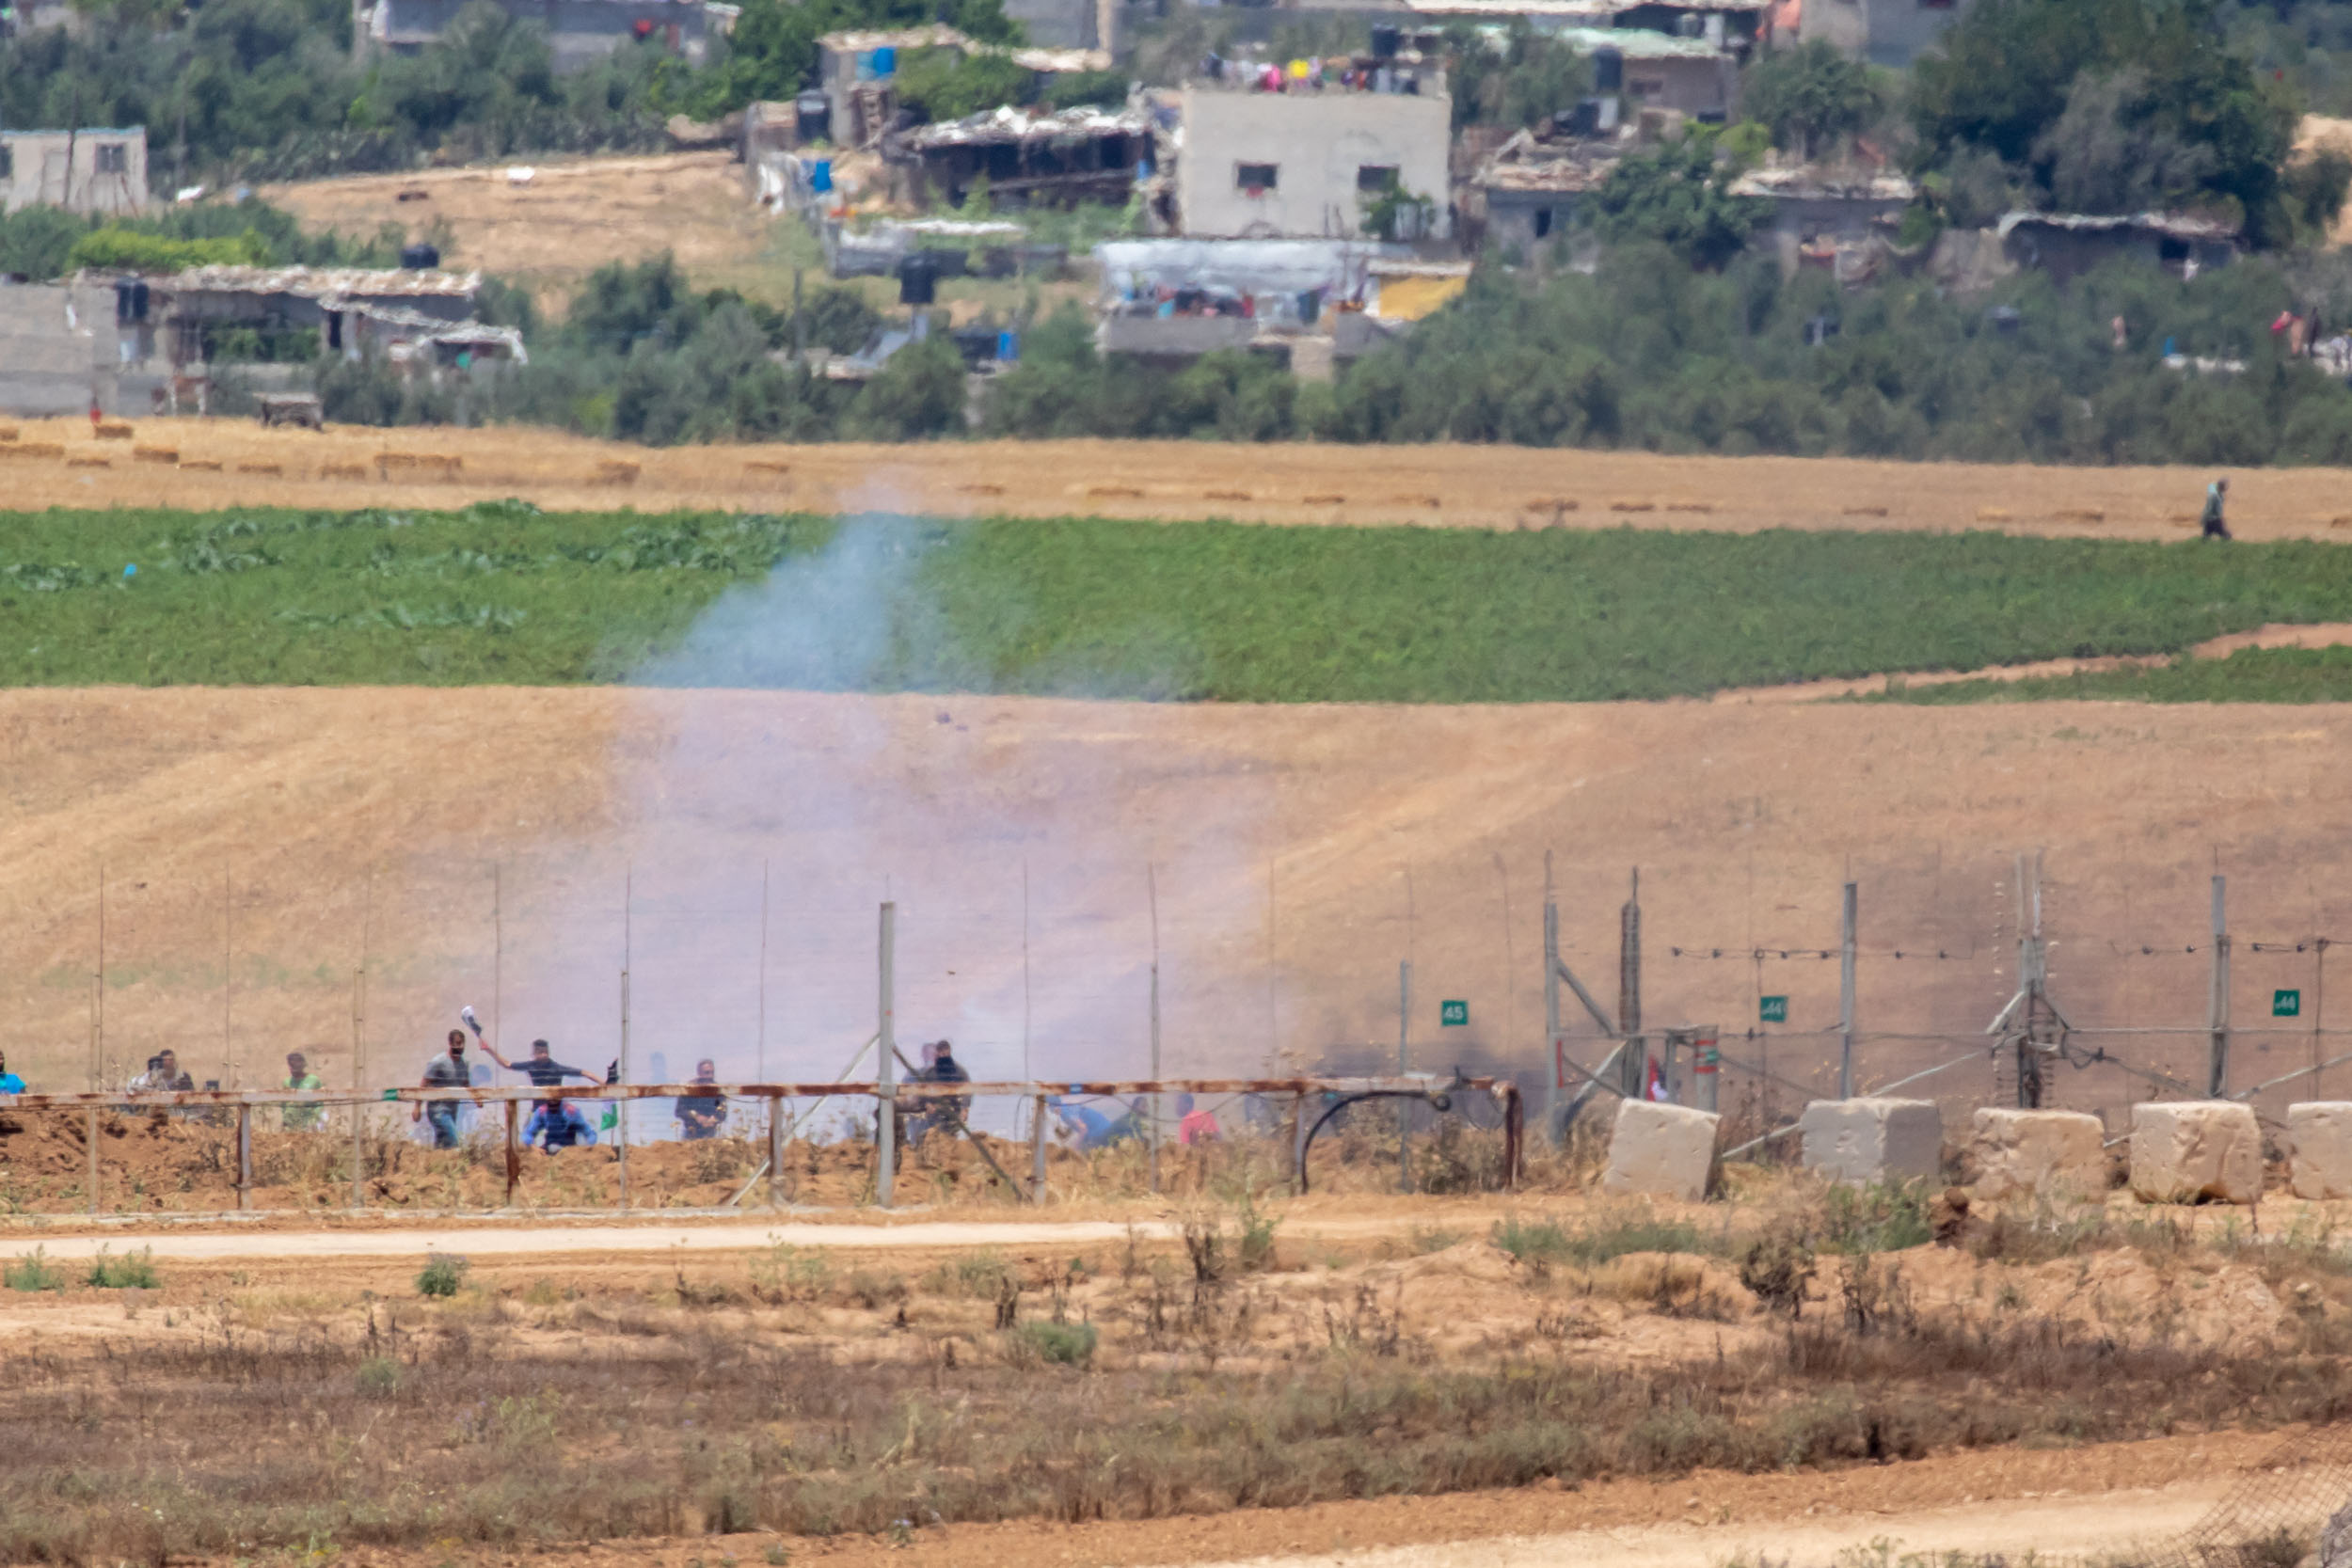 Northern Gaza Border, May 2018 - Clashes between IDF and Gaza peoples trying to forcefully cross the Israeli border